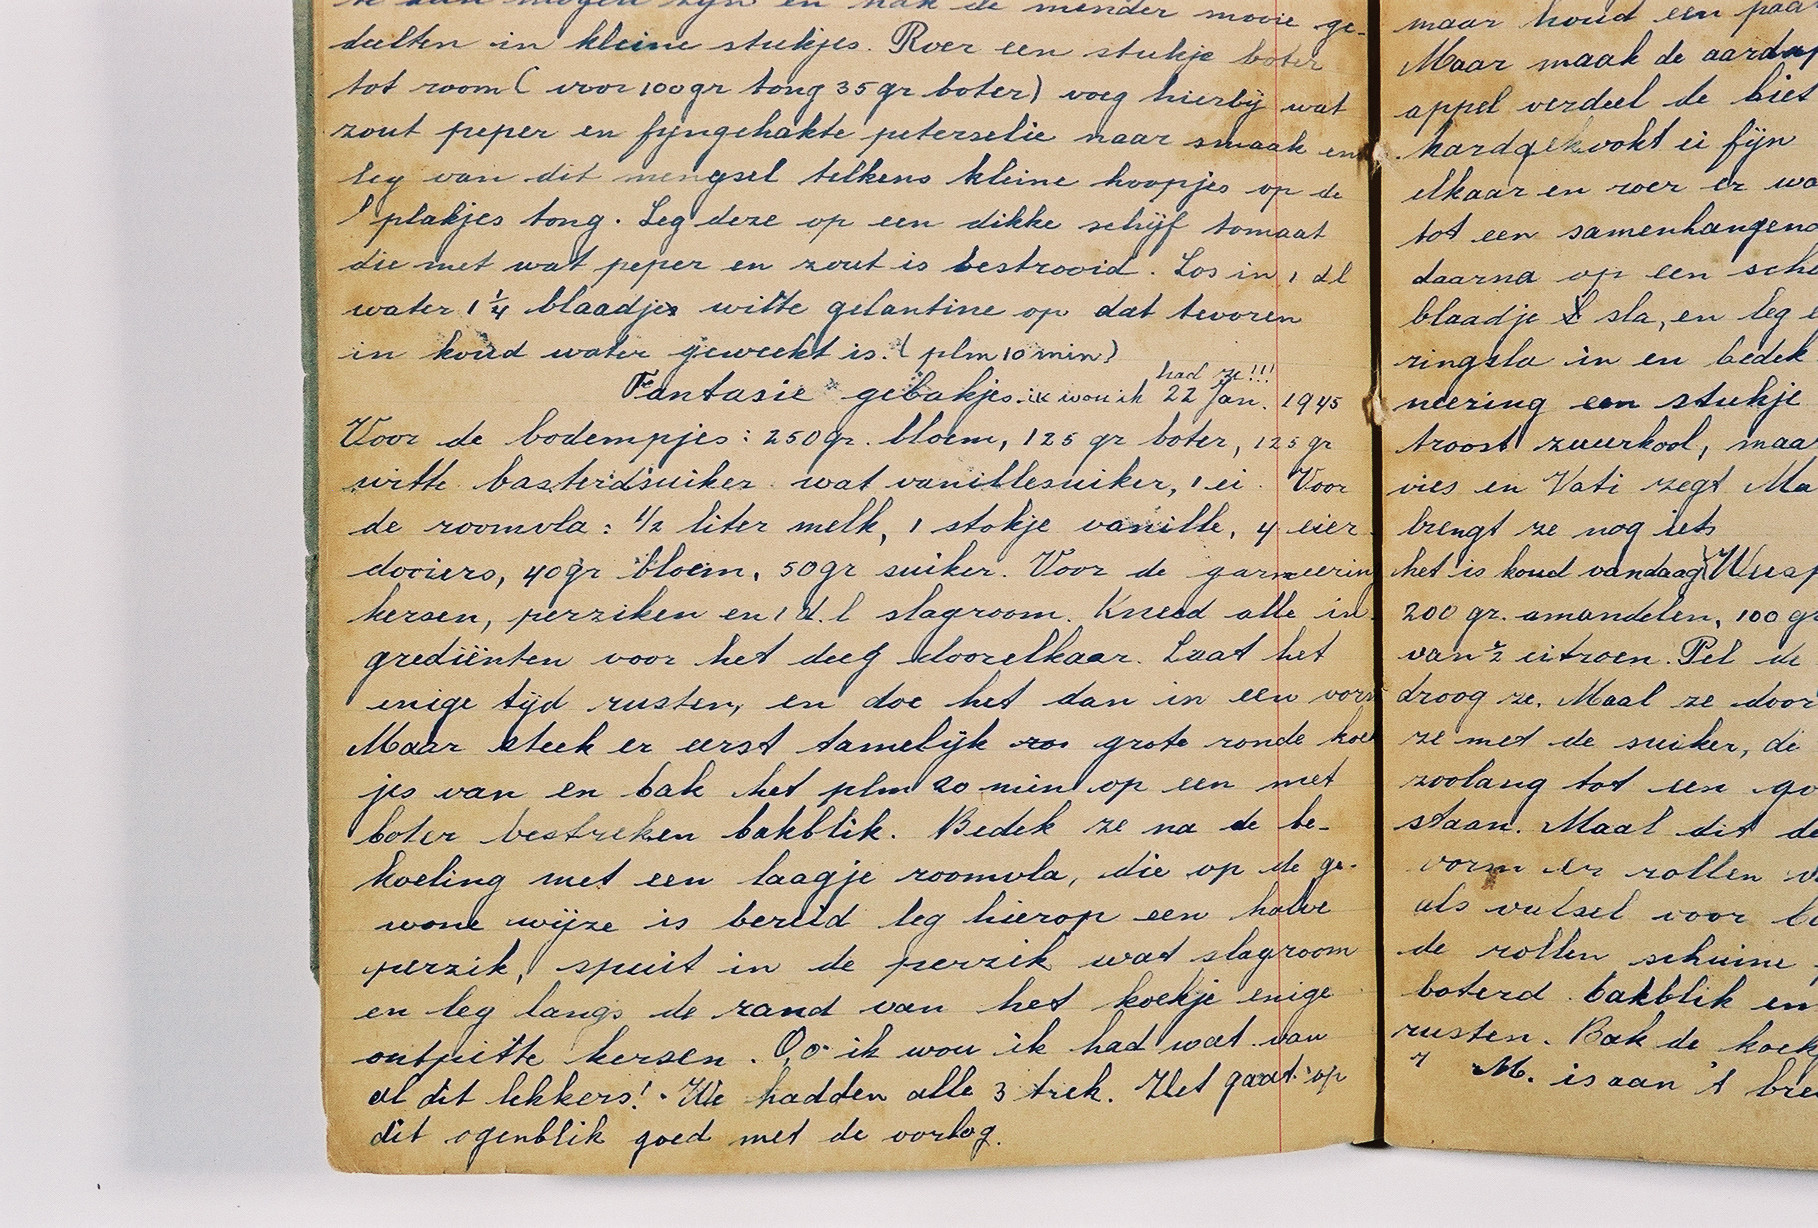 A detail of a page from a diary written by Susie Grunbaum Schwarz while in hiding.  She disguised the diary in the form of a cookbook written in several languages.